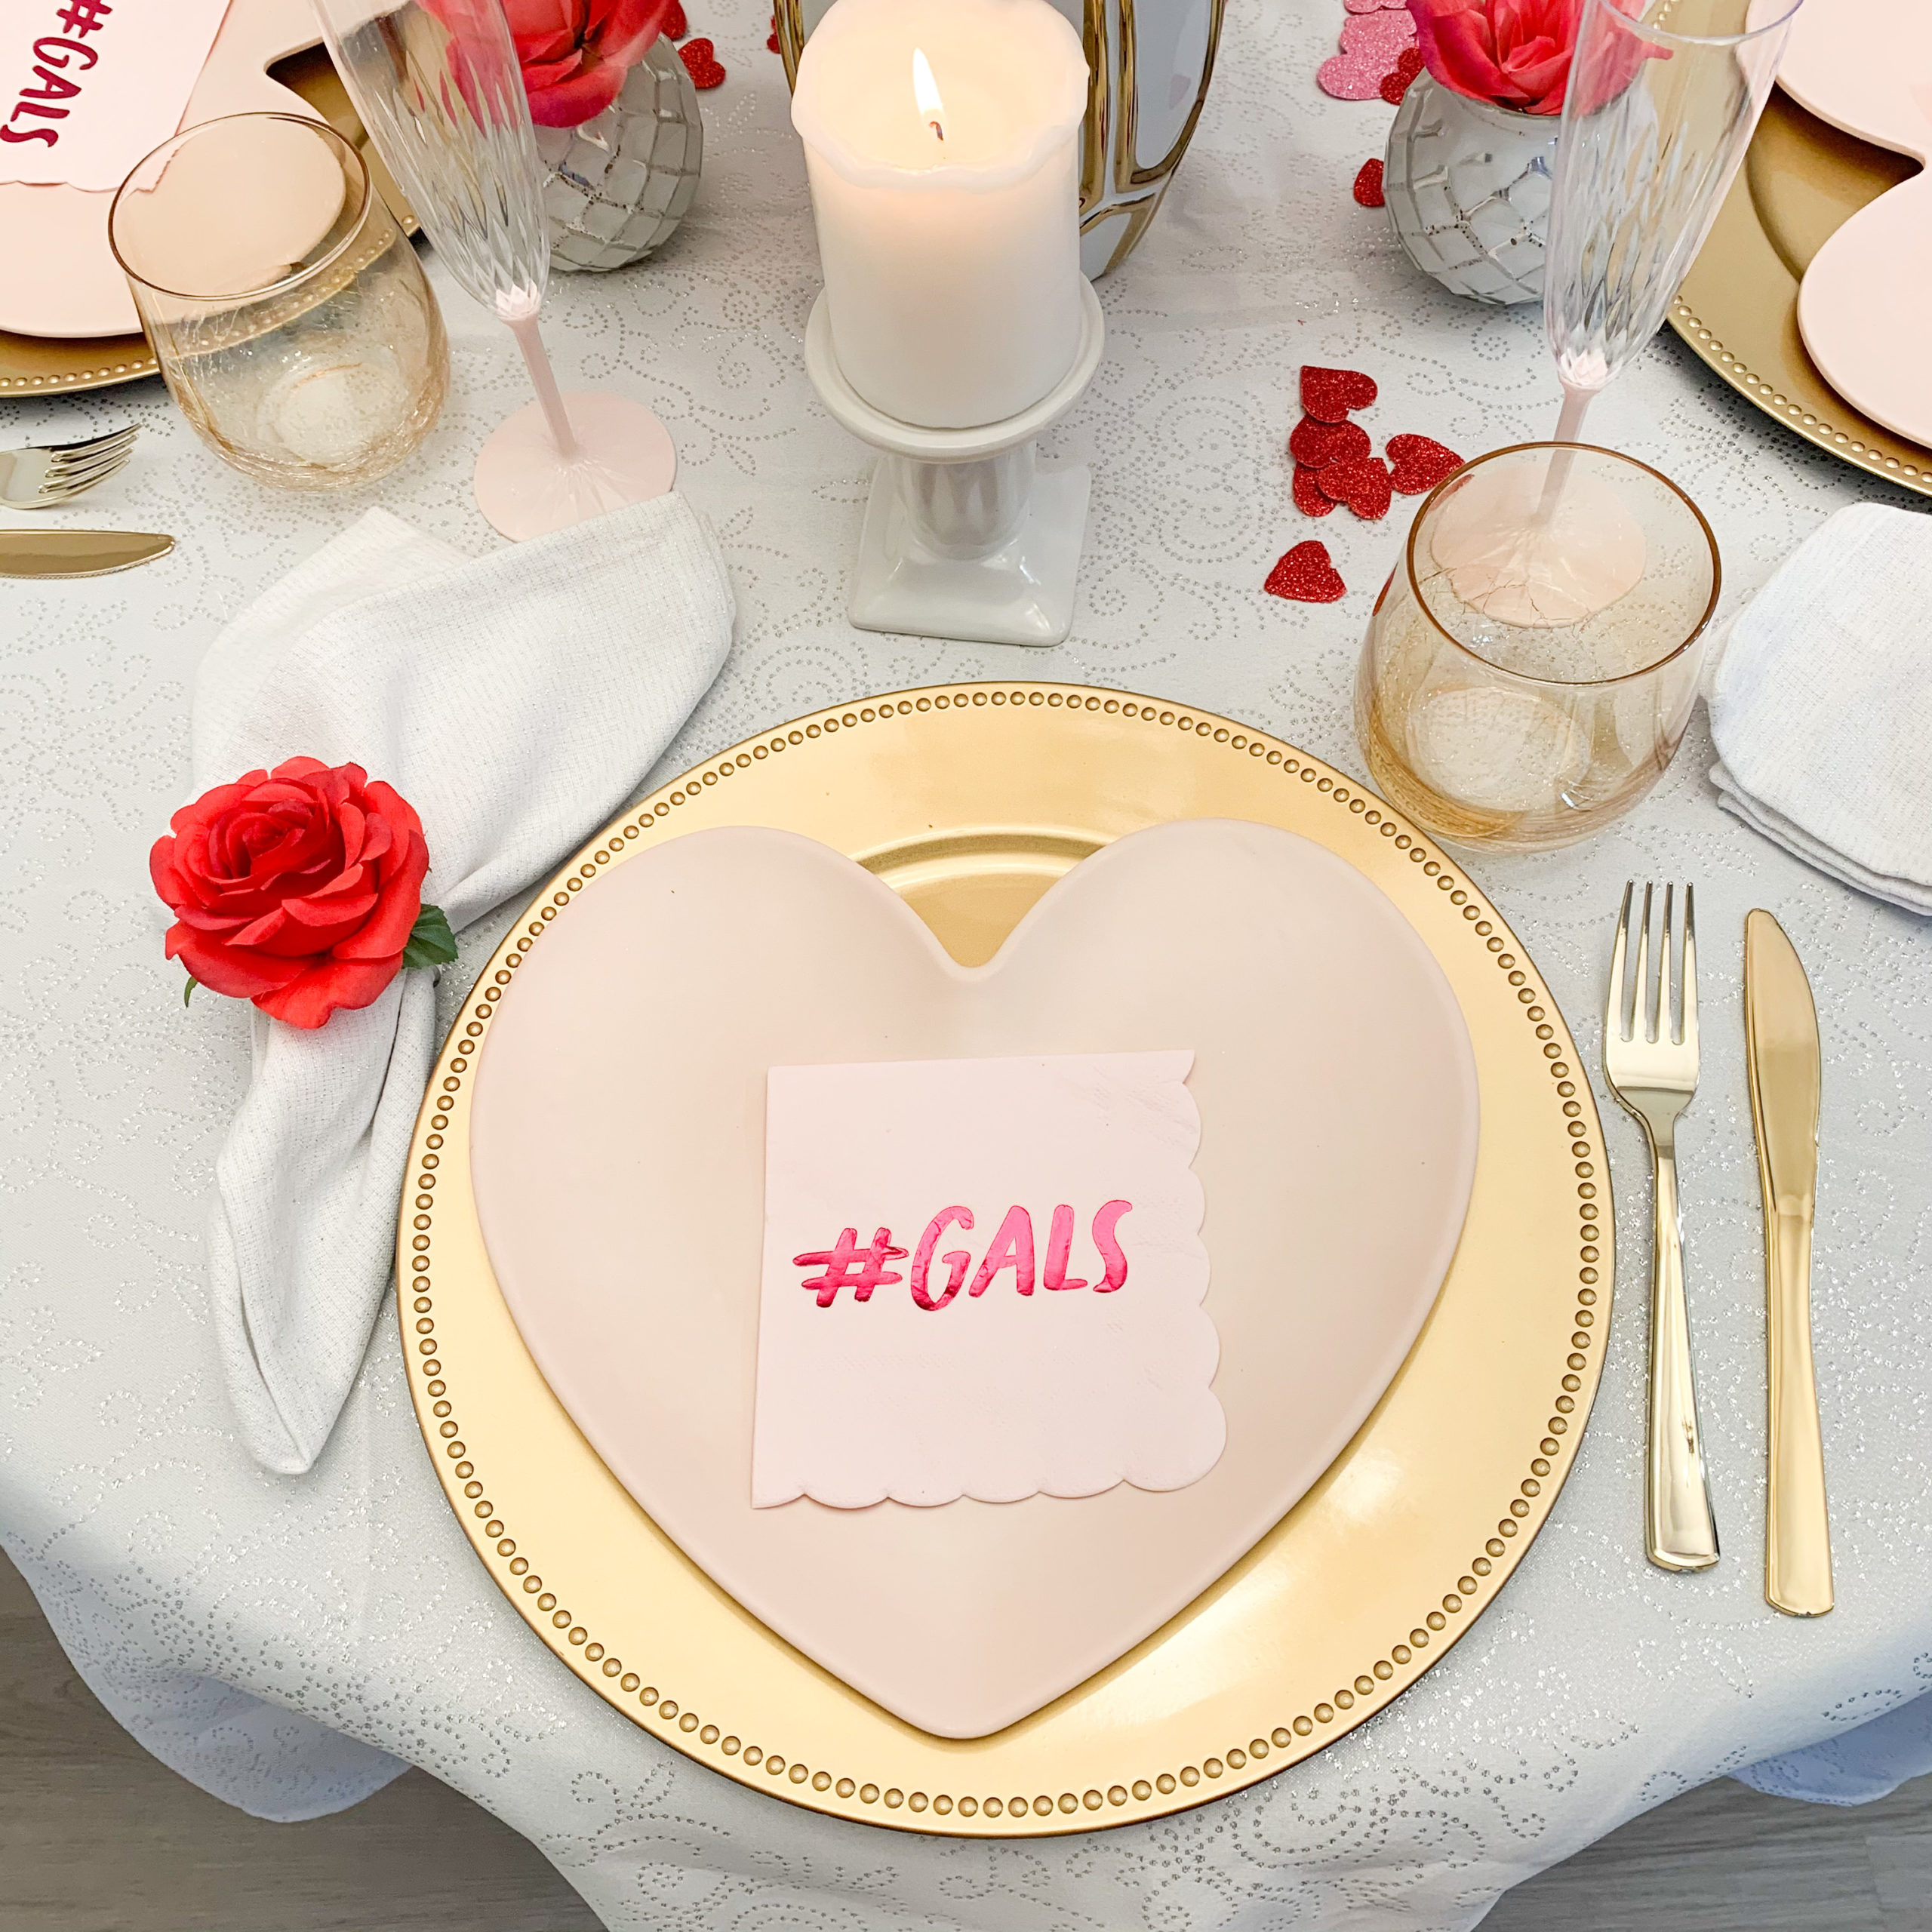 Galentine's Day placesetting